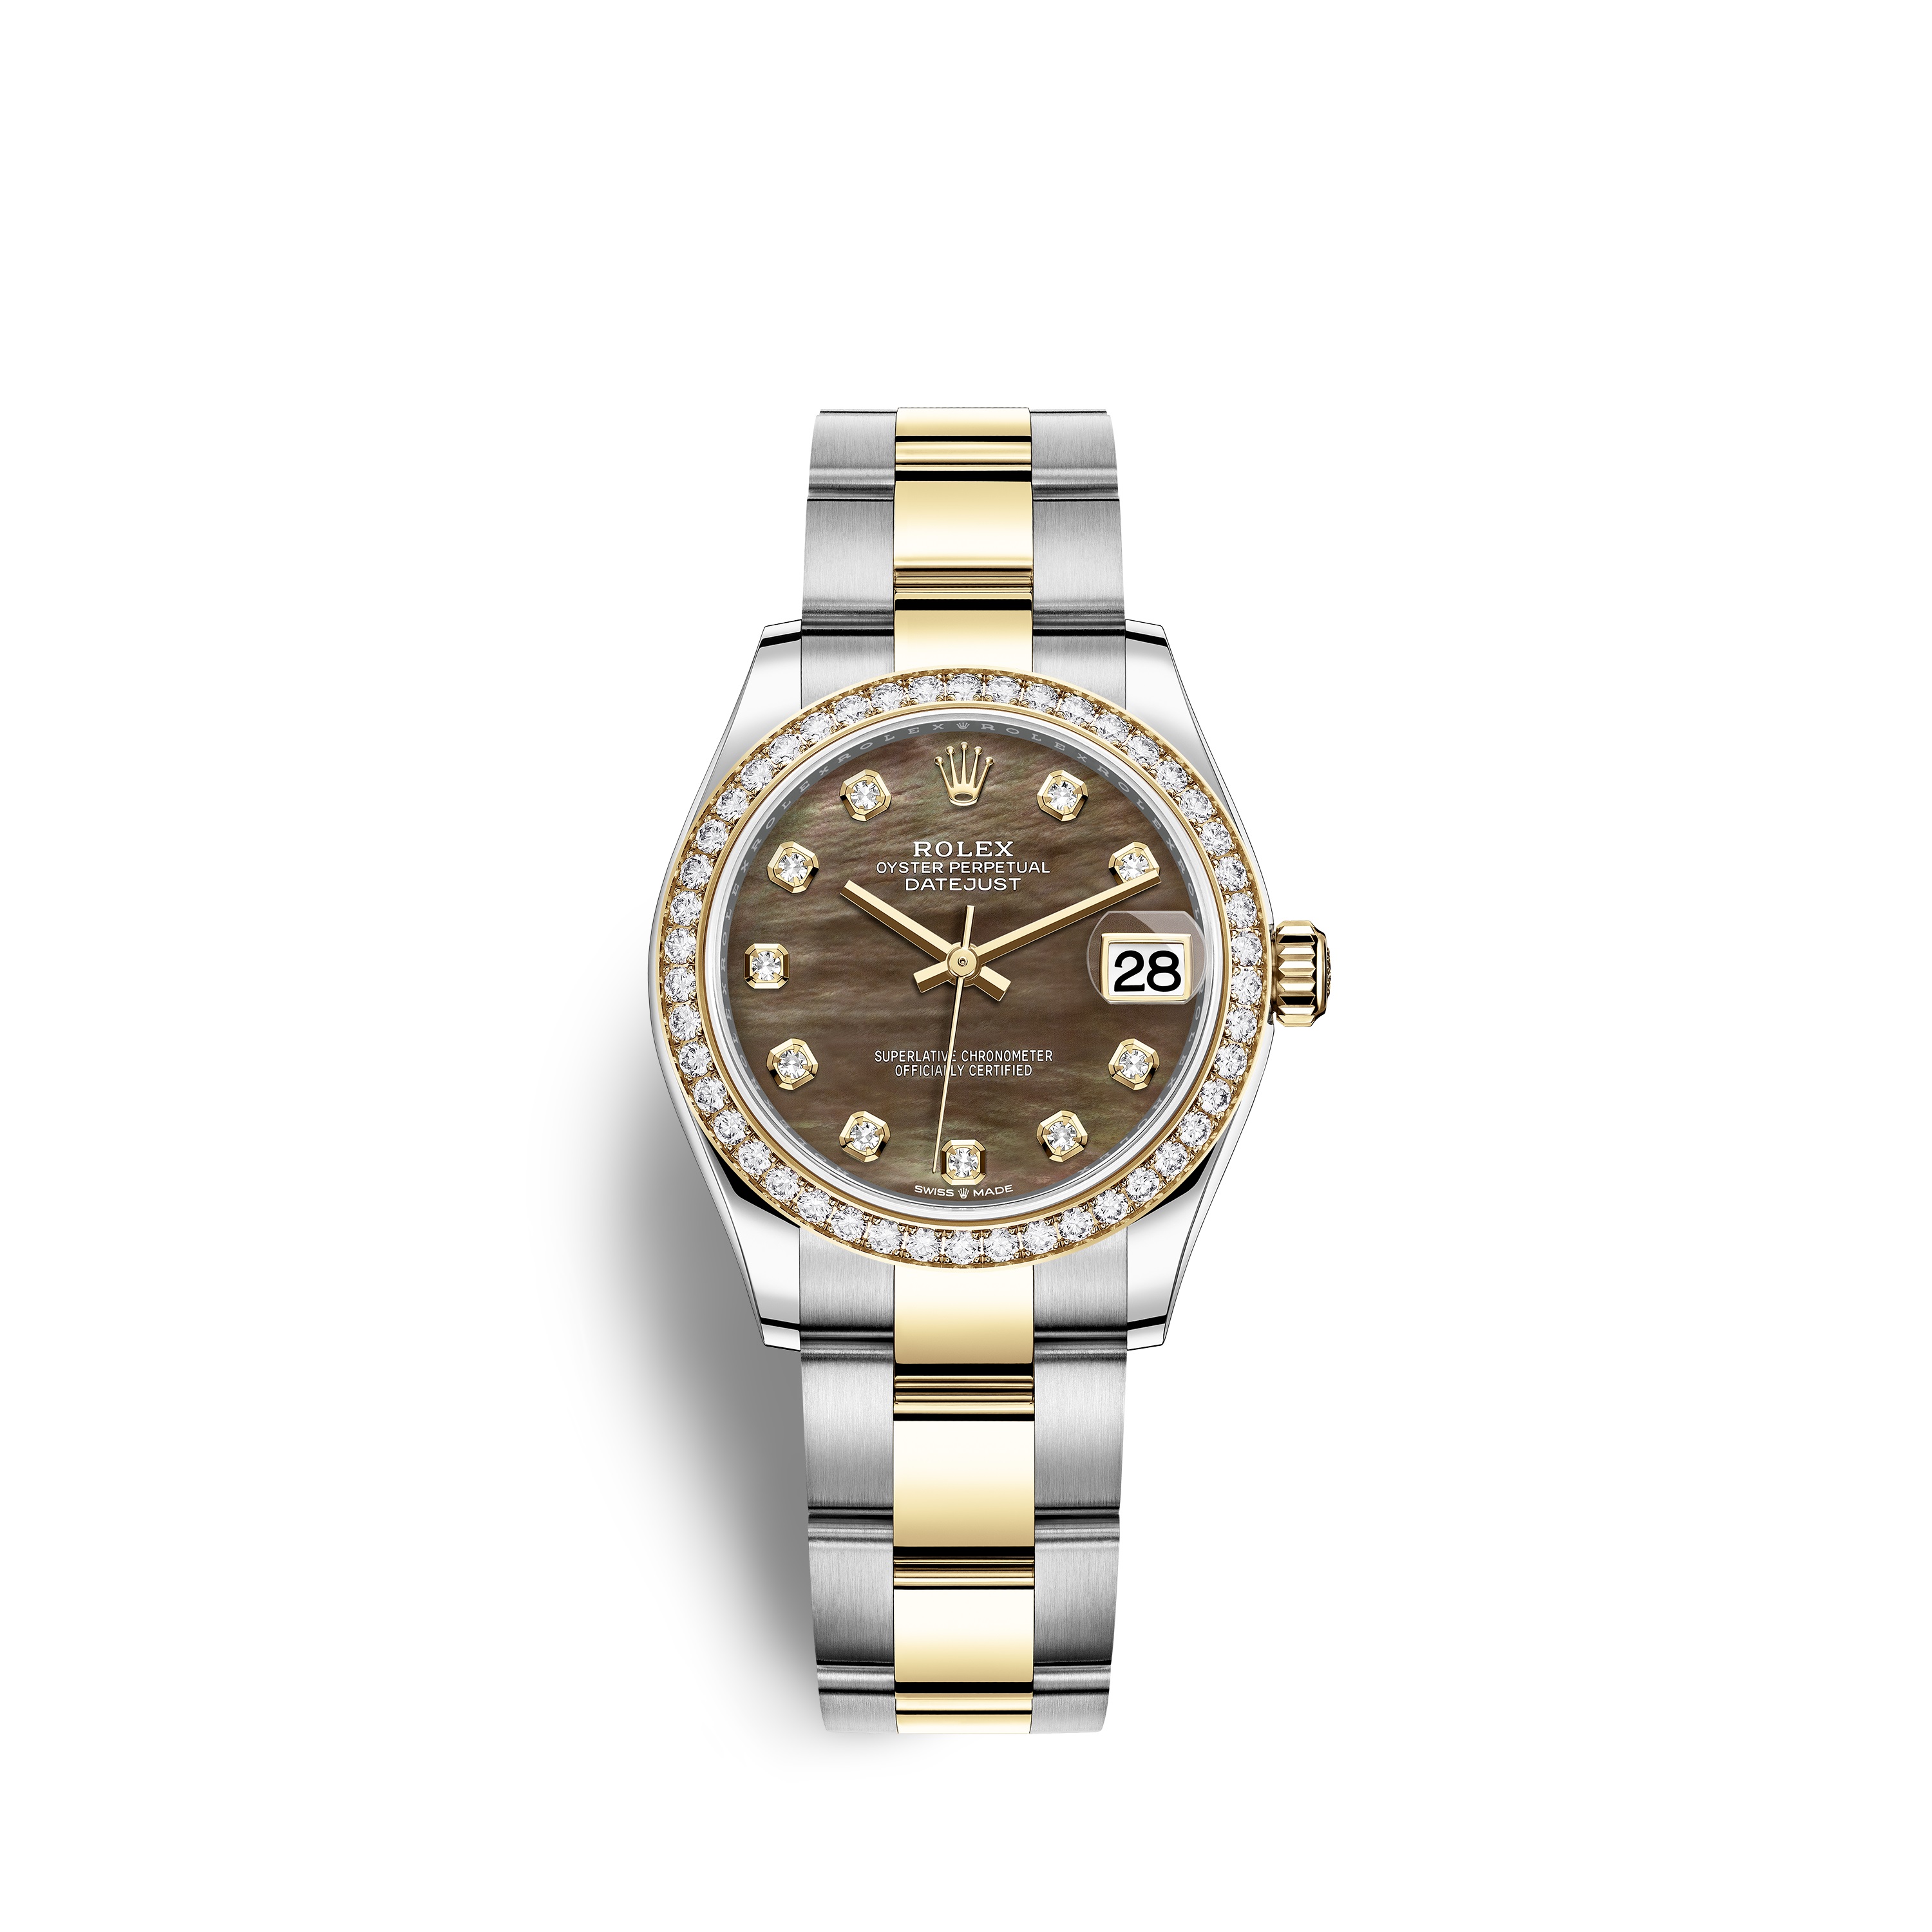 Datejust 31 278383RBR Gold & Stainless Steel Watch (Black Mother-of-Pearl Set with Diamonds)